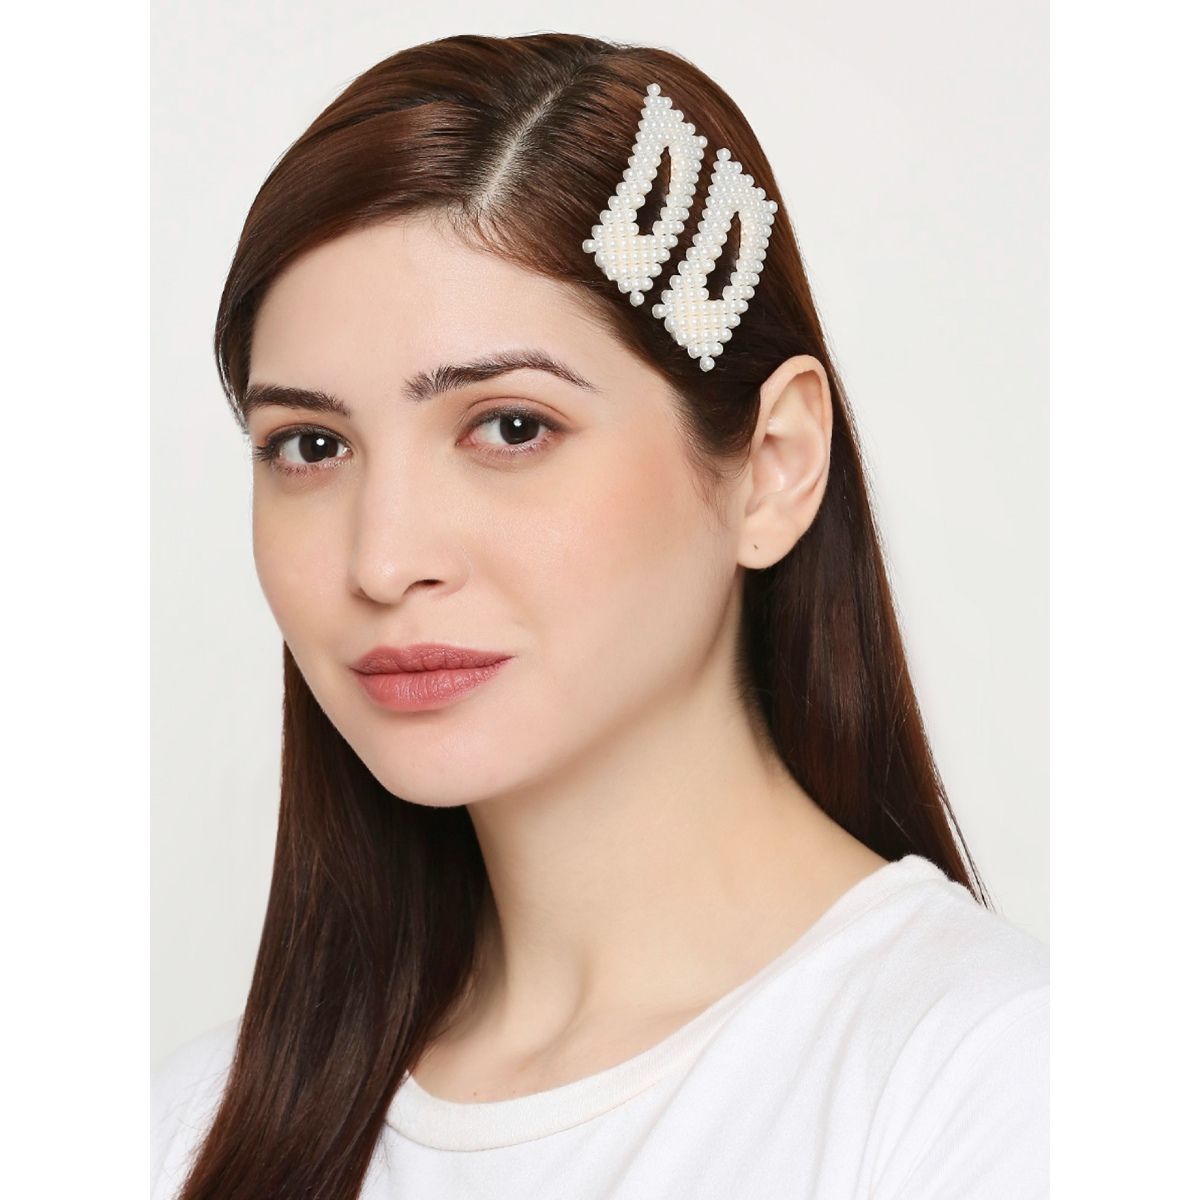 HeartStarFlowerBowOvalMoon shapesset of 6 Hair ClipsClawclutch for  Girls Hair Clip Price in India  Buy HeartStarFlowerBowOvalMoon  shapesset of 6 Hair ClipsClawclutch for Girls Hair Clip online at  Shopsyin